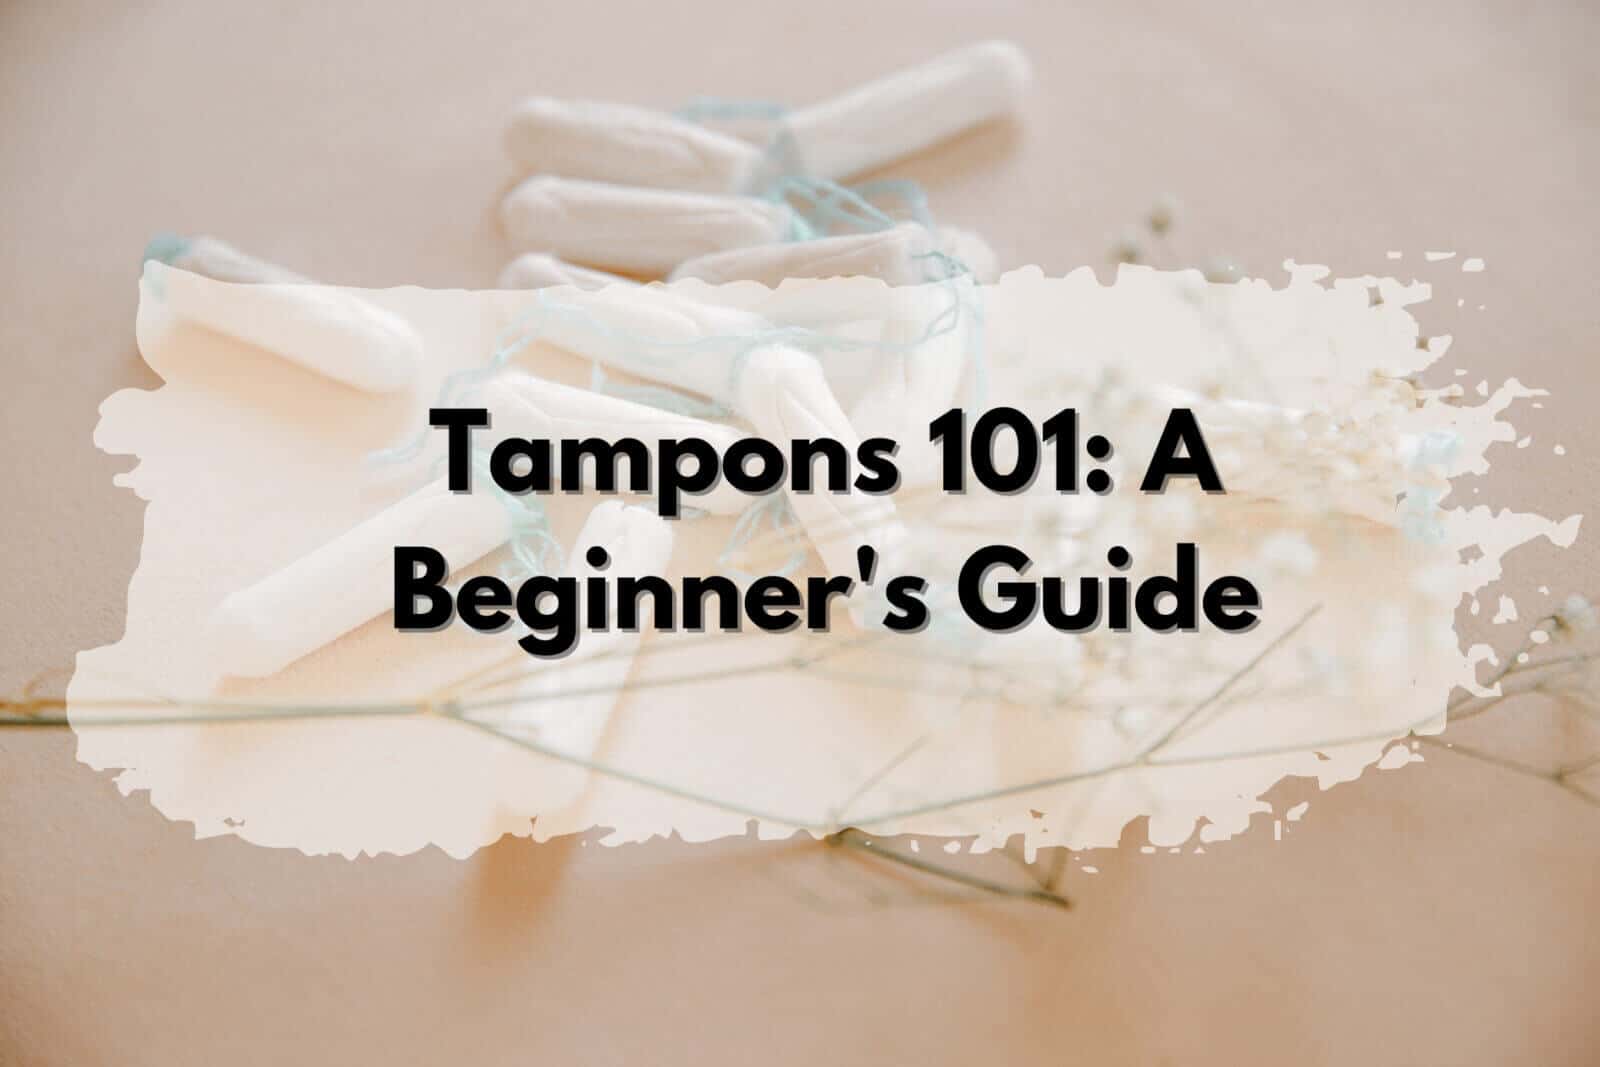 Tampons: A Beginner's Guide